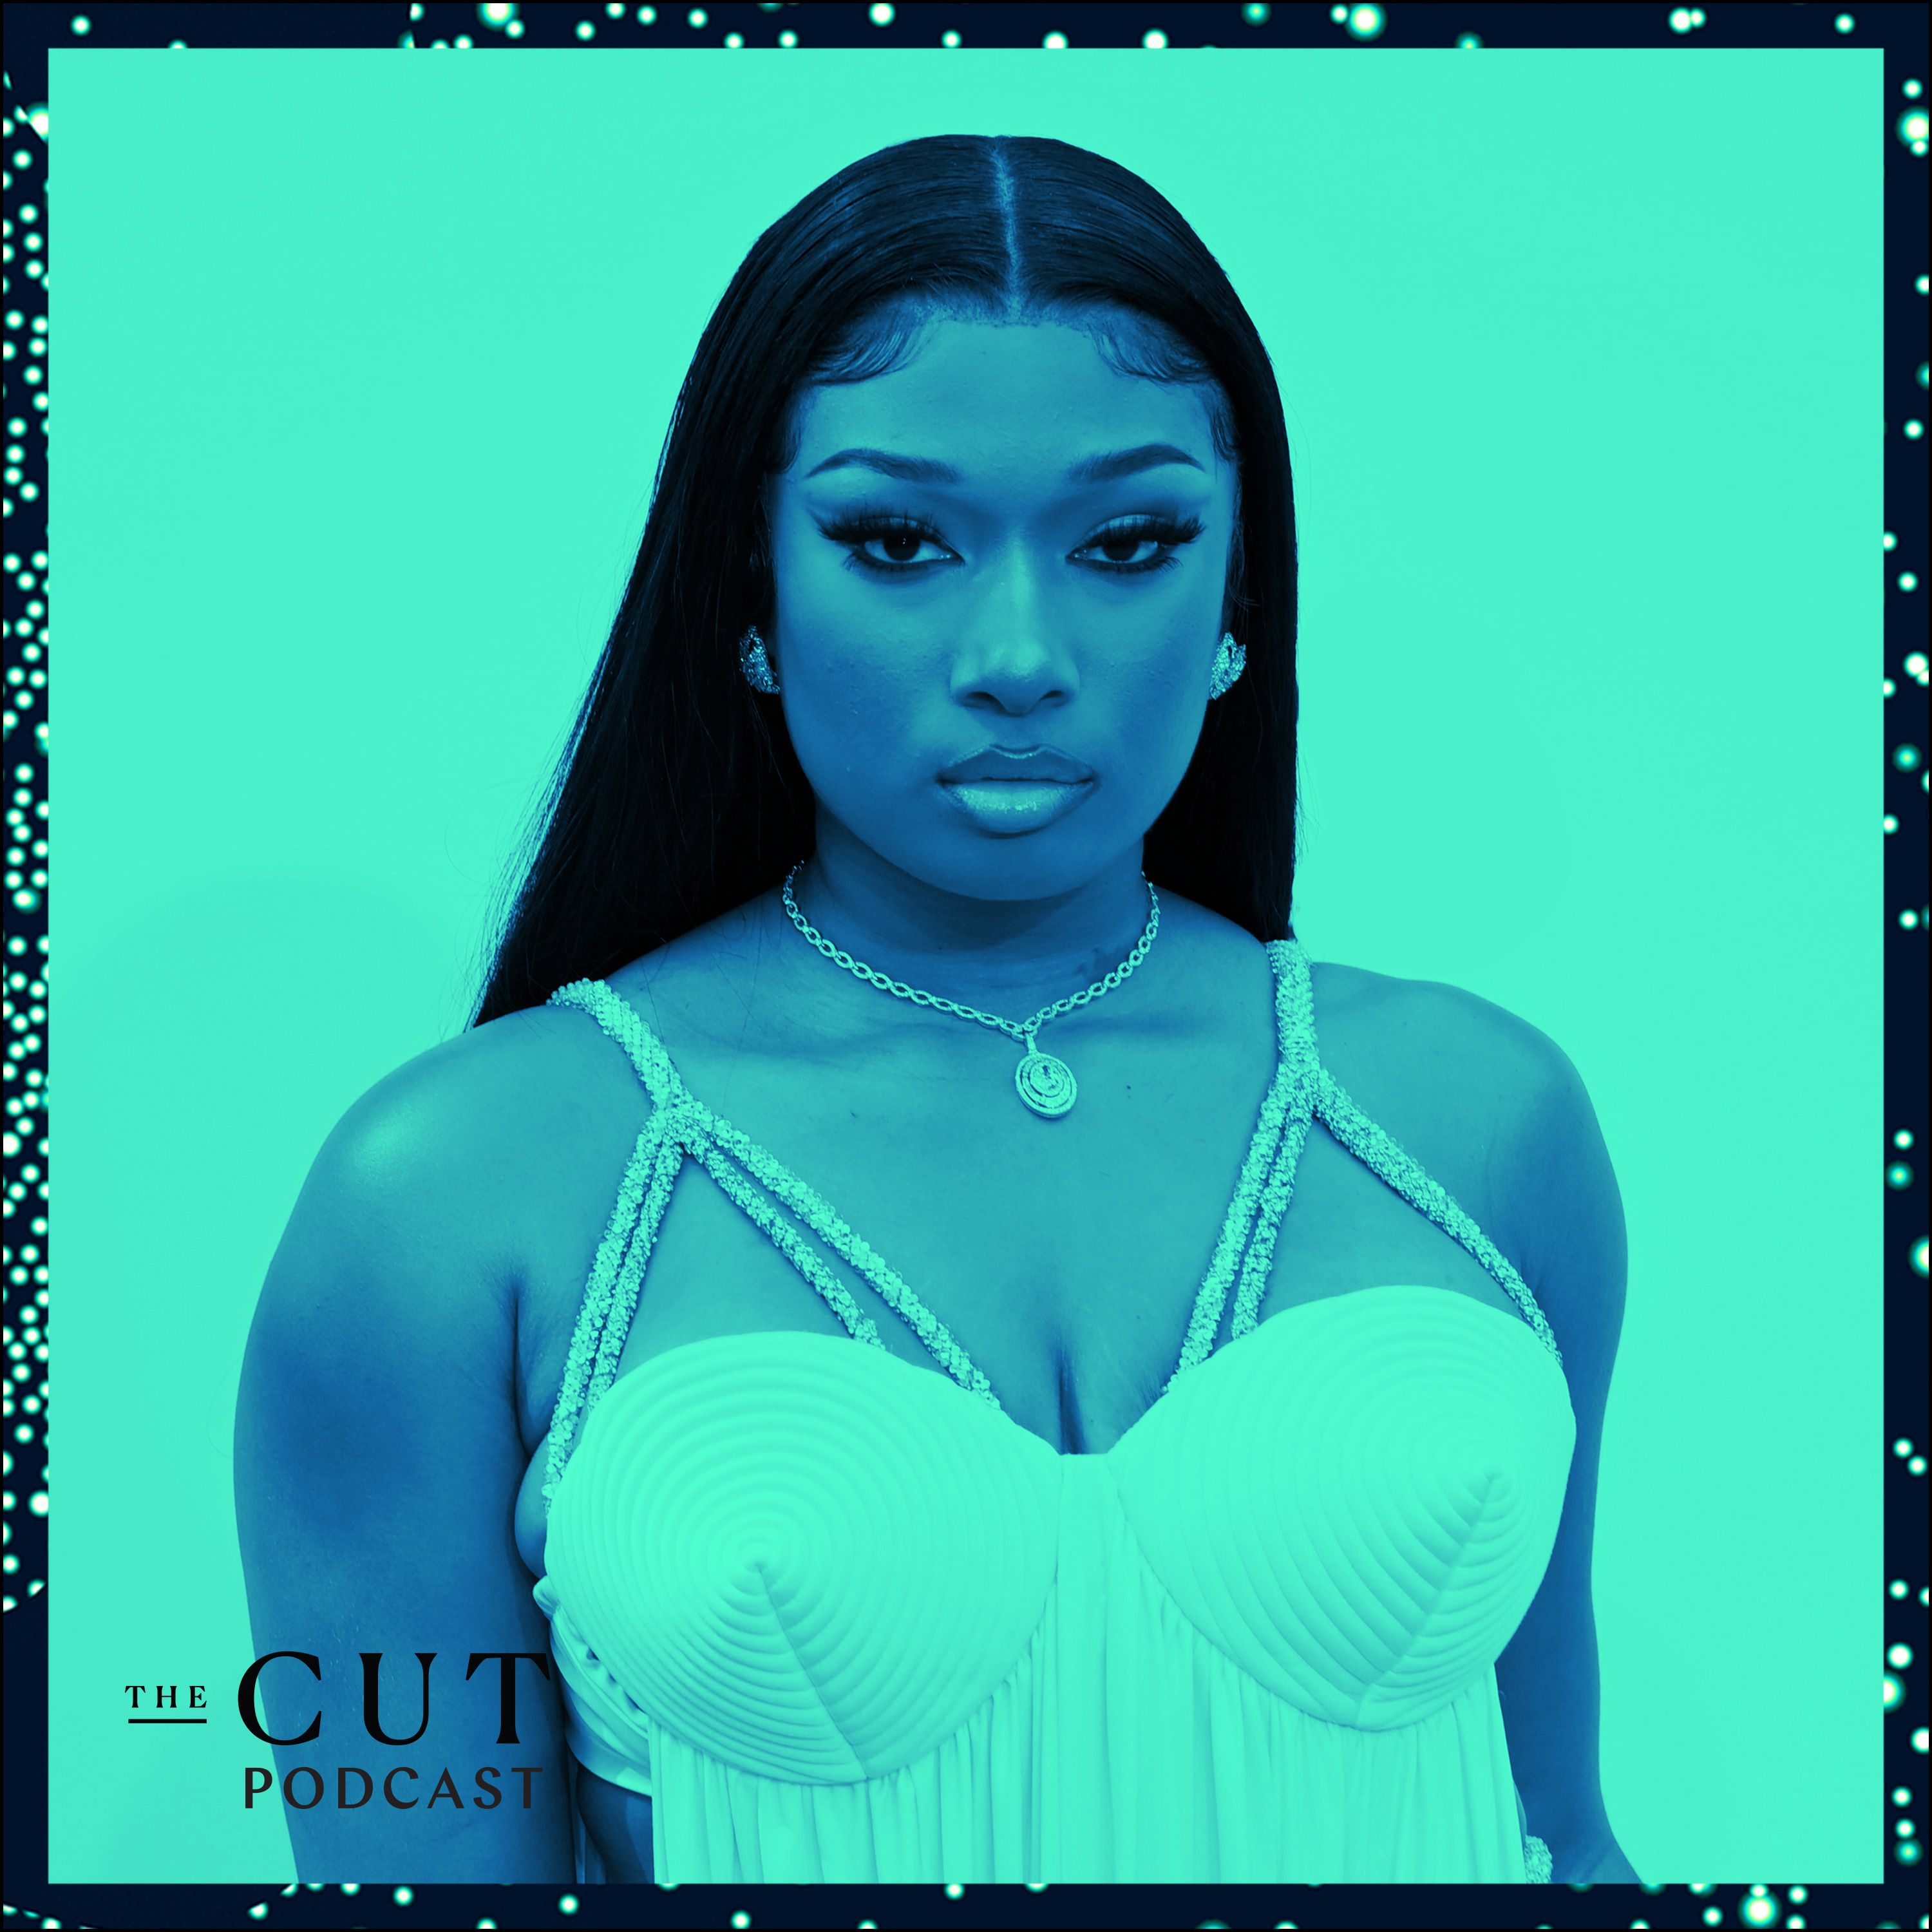 Block Girls Sex Com - The Cut Podcast: Why Does the Internet Hate Black Women?